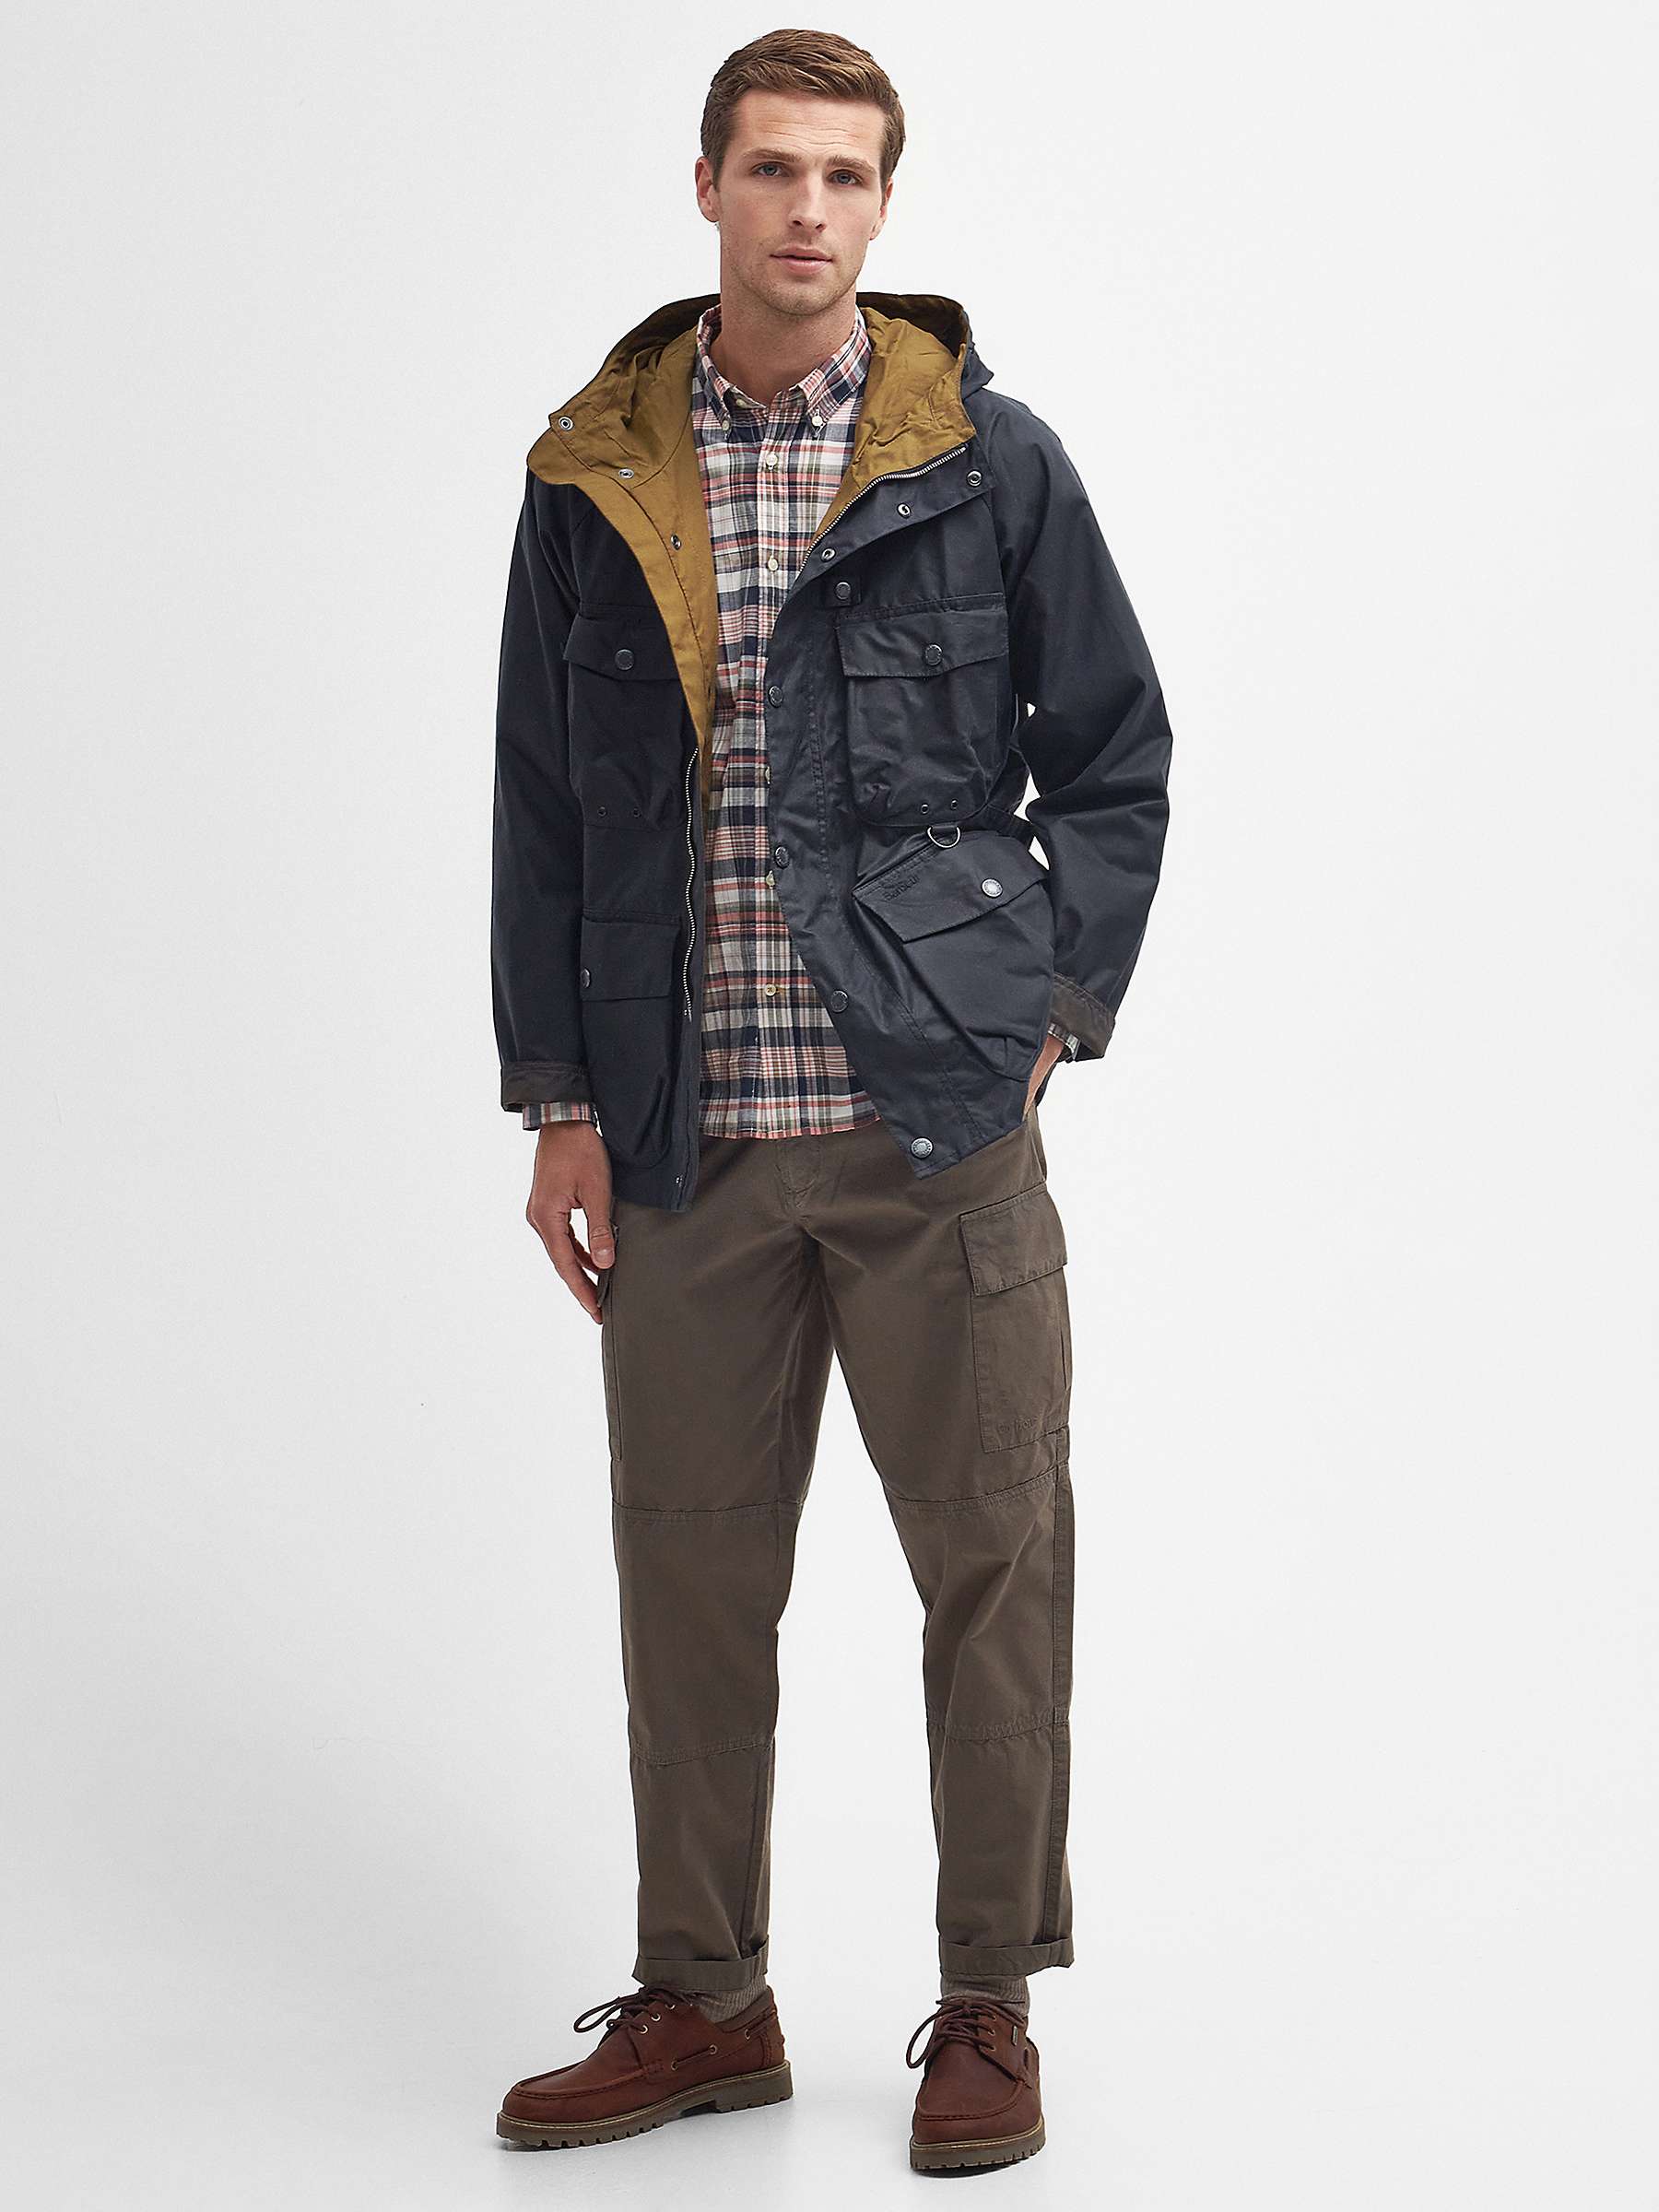 Buy Barbour Tarn Utility Waxed Jacket, Navy Online at johnlewis.com